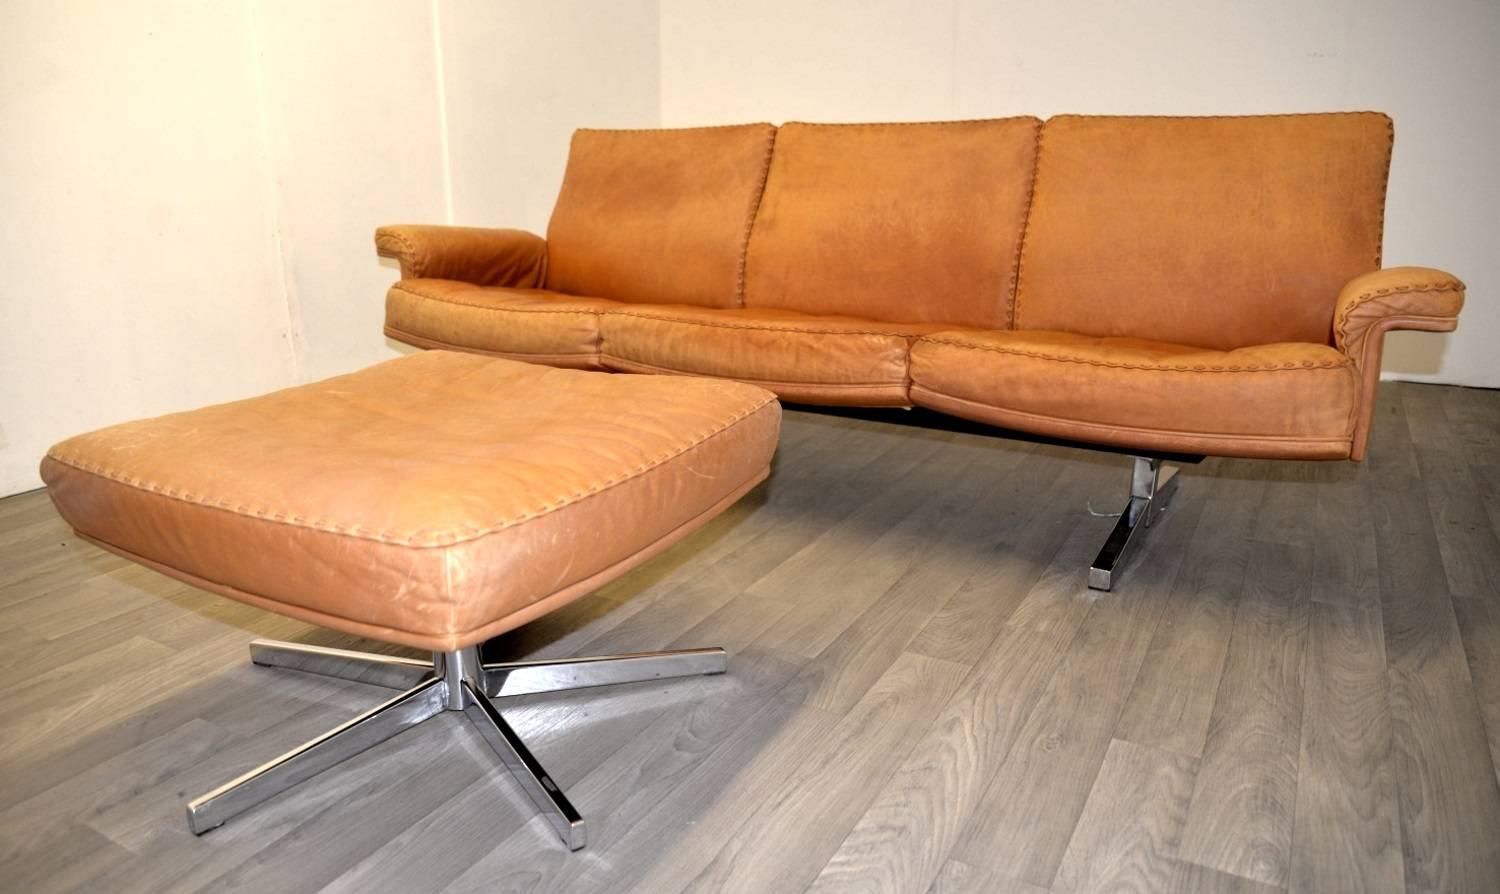 Discounted airfreight for our US and International customers ( from 2 weeks door to door)

The Cambridge Chair Company brings to you a highy desirable vintage de Sede three-seat sofa and matching ottoman. Built in the late 1960`s by de Sede